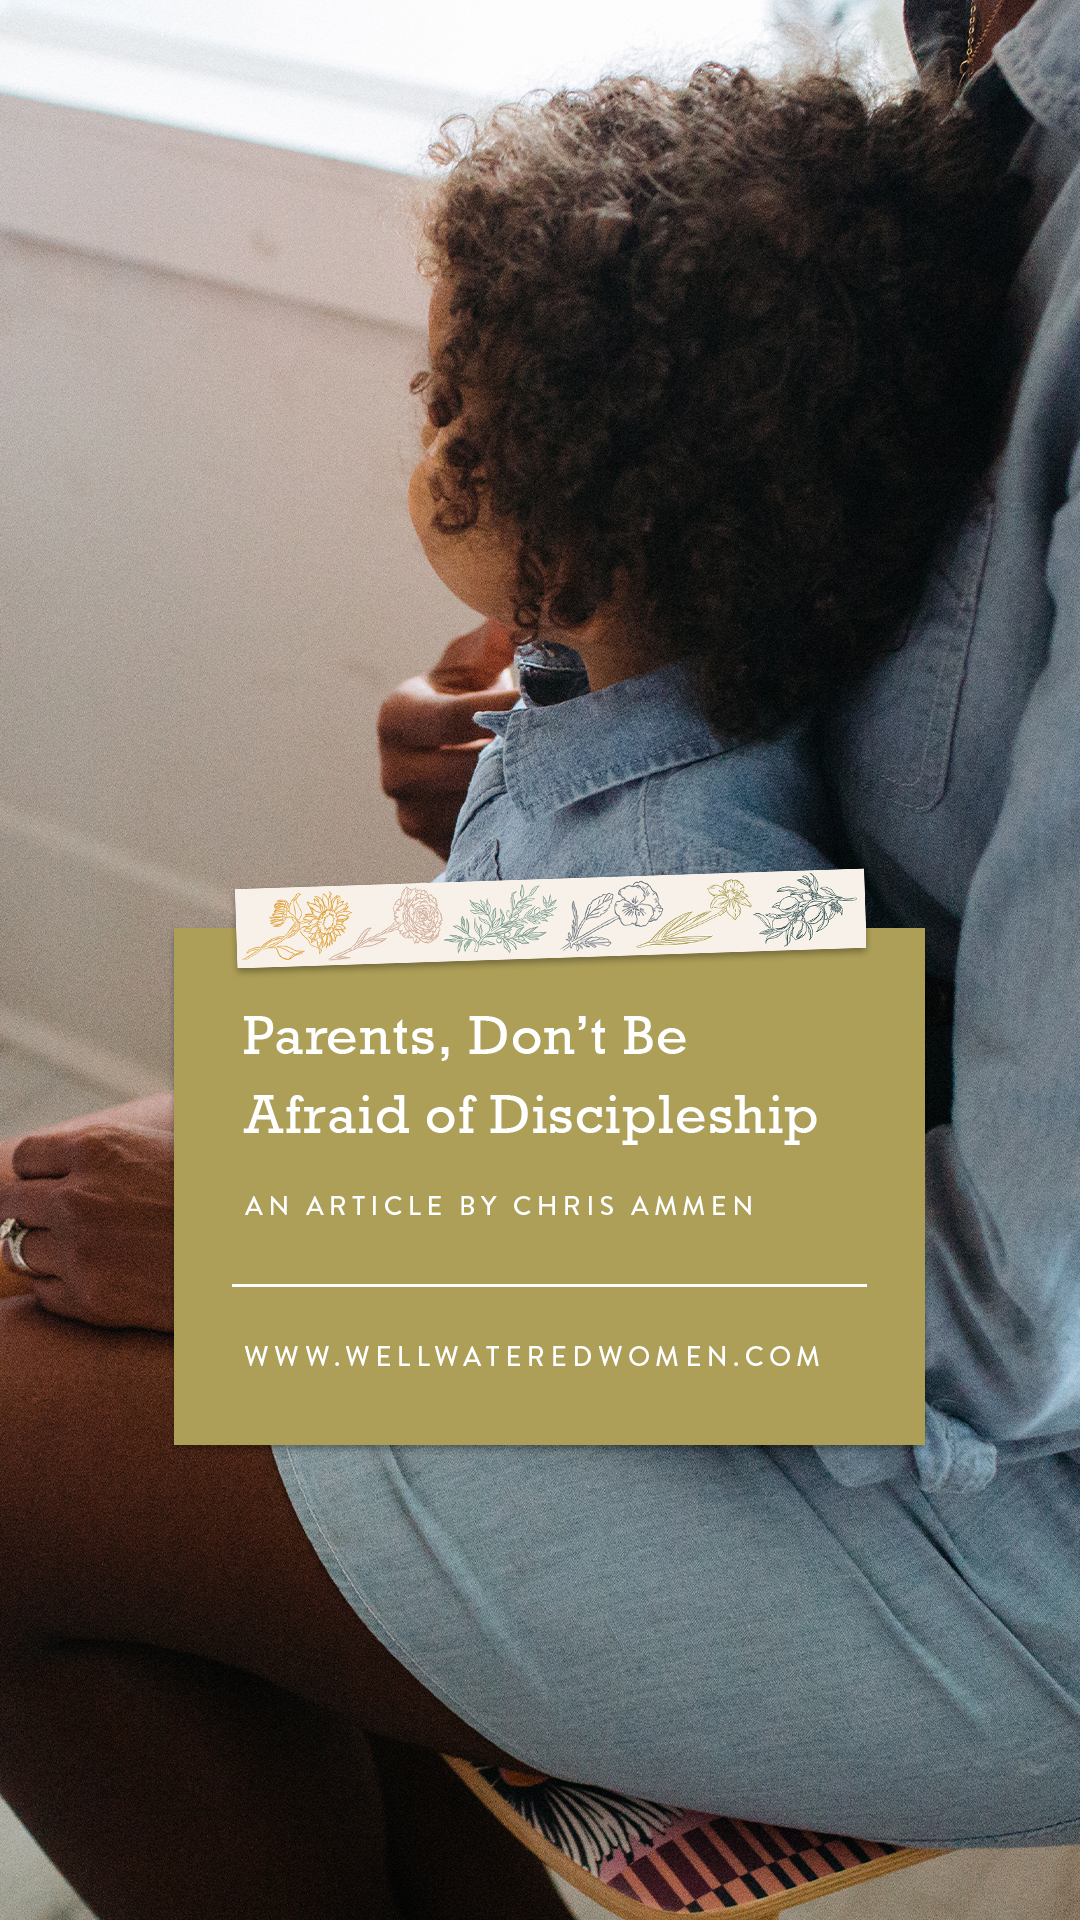 Parents, Don't Be Afraid of Discipleship-an article from Well-Watered Women